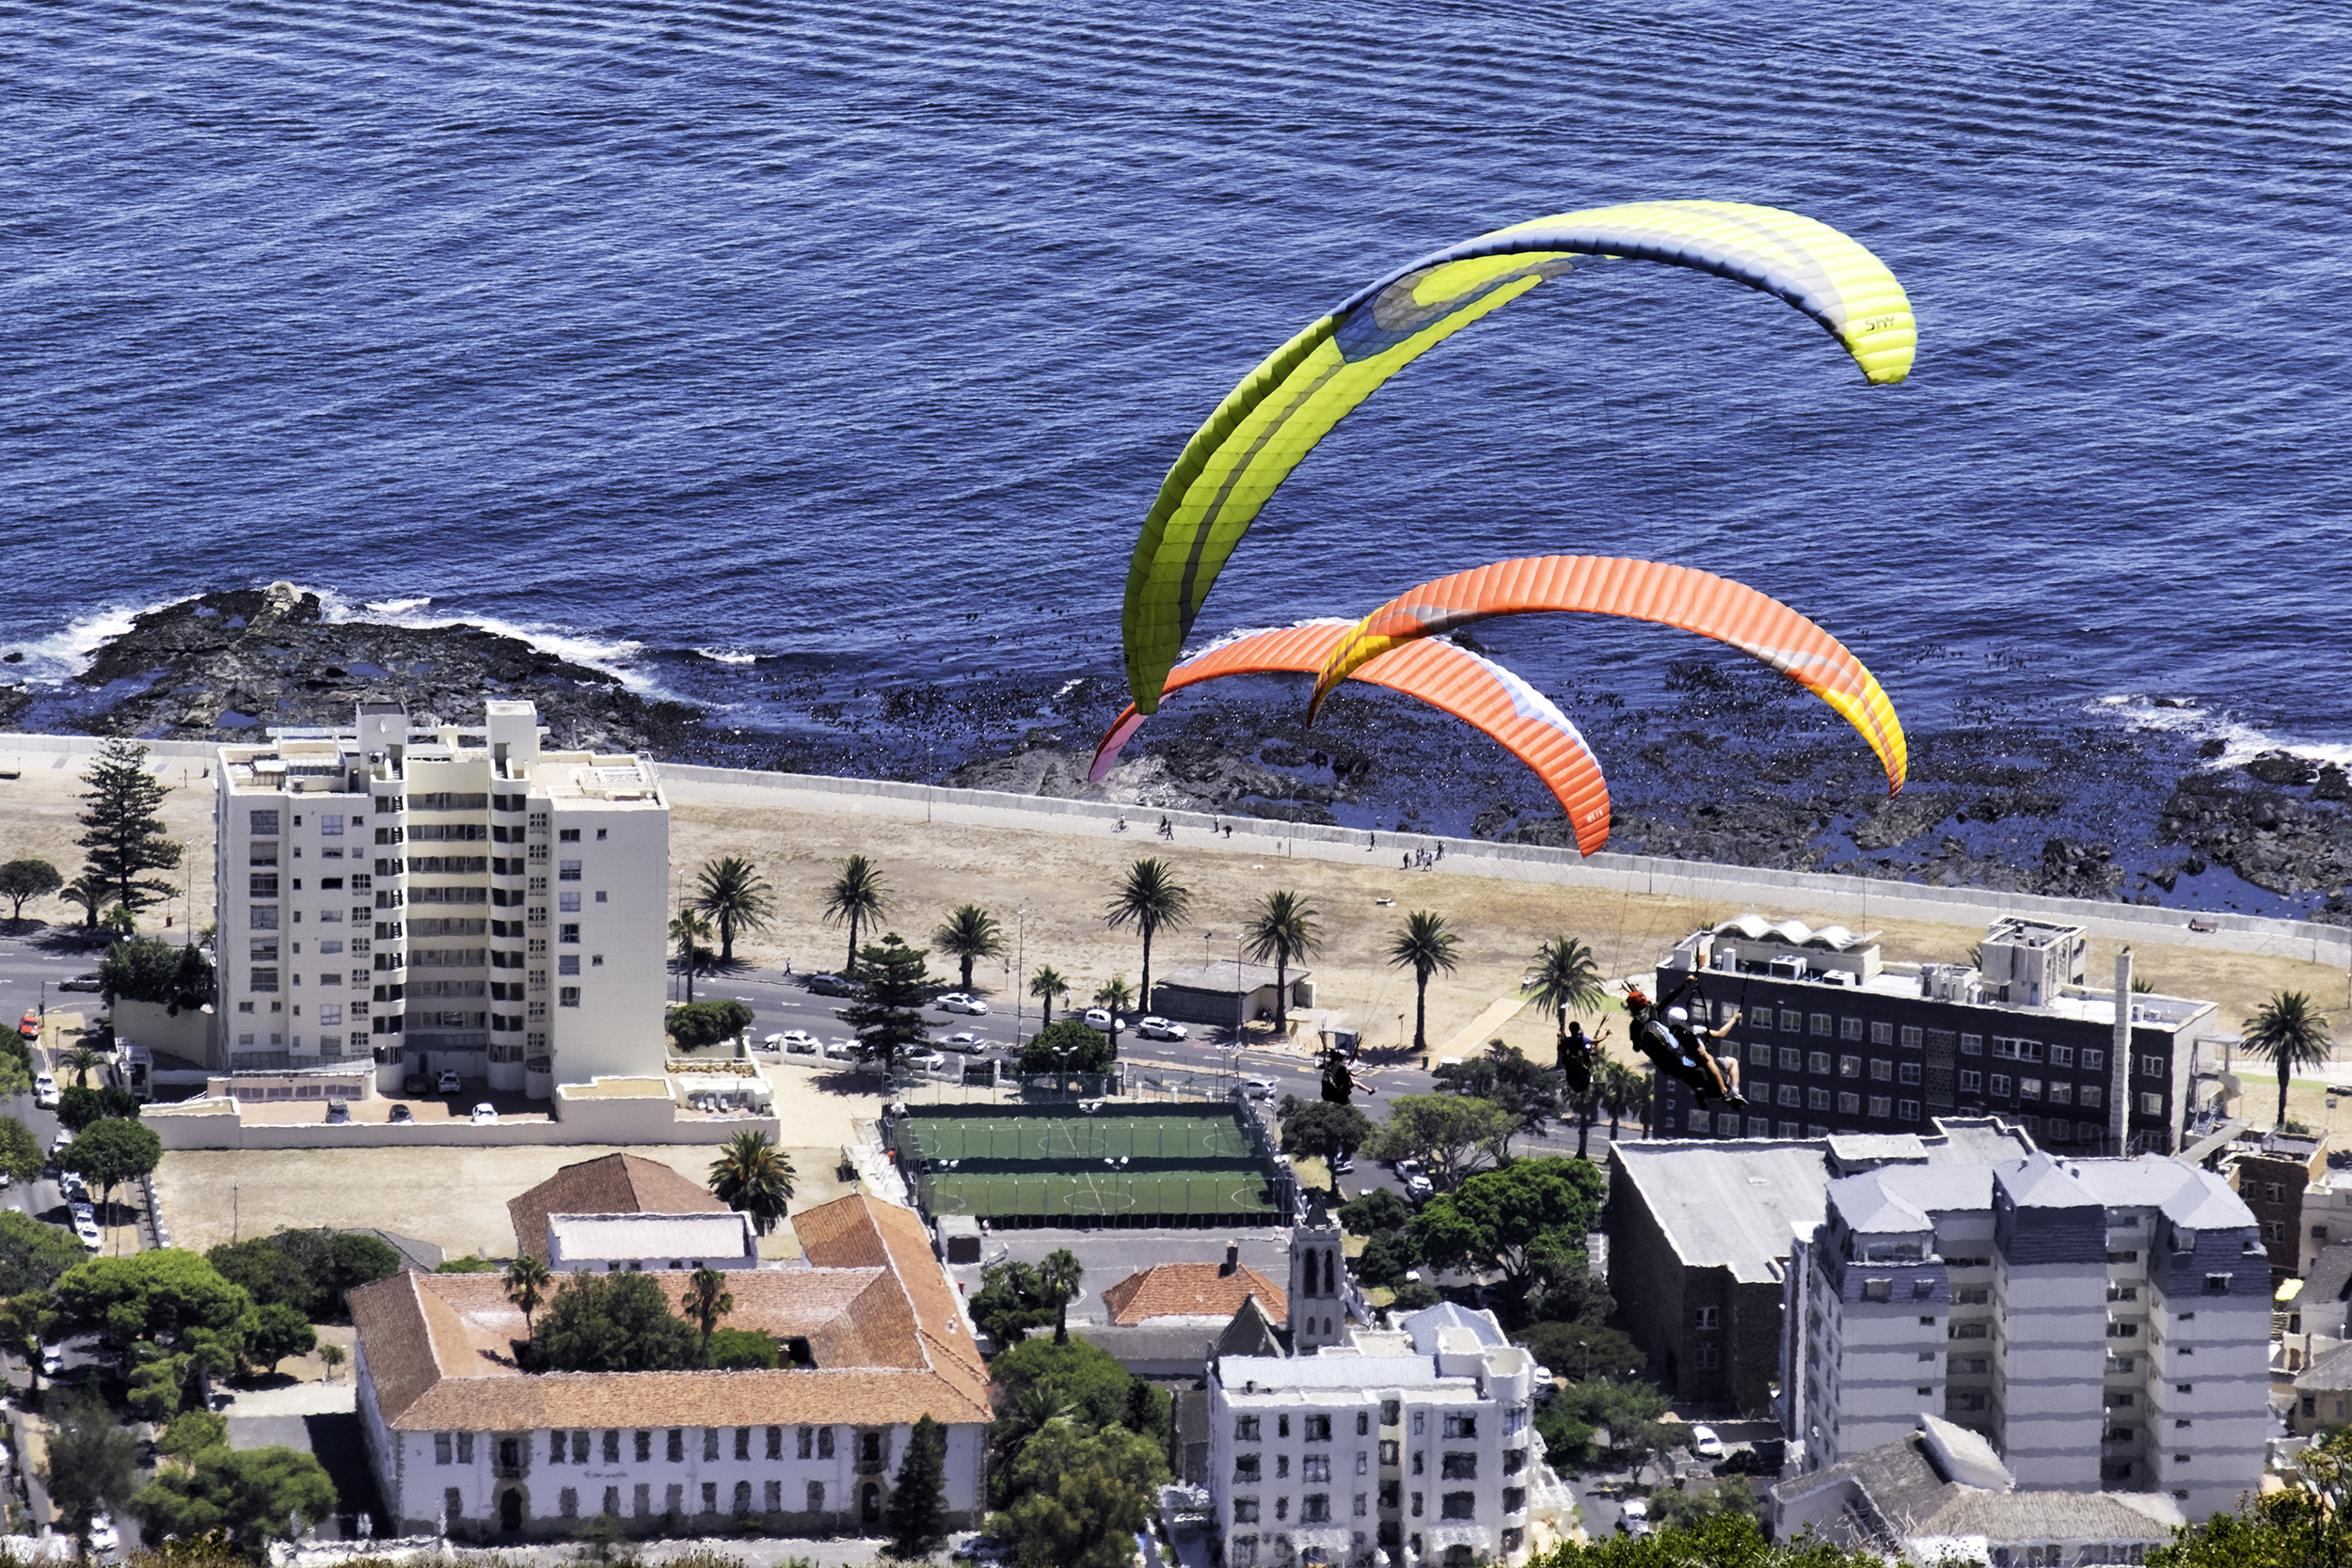 Hang Gliders over Sea Point, Cape Town, South Africa